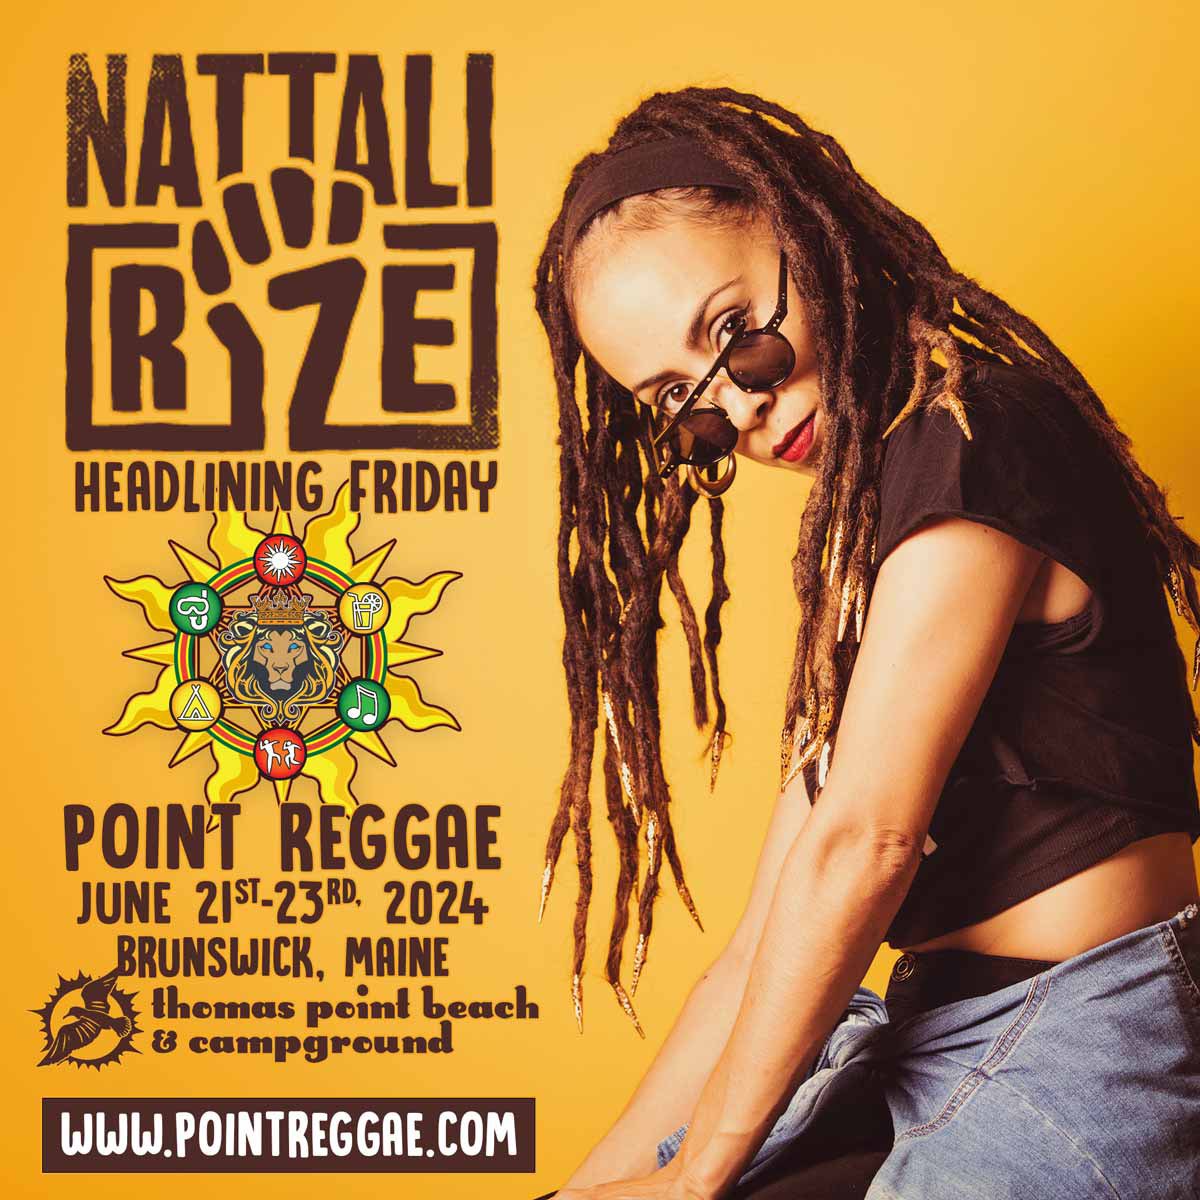 First show announcement for 2024 🌞 See You at @PointReggaeFest Brunswick ME USA for summer solstice positive waterfront vibrations. This is easily one of my favorite events on the east coast, amazing location, swimming & camping spots 🌲🌞🌊 tix & info pointreggae.com